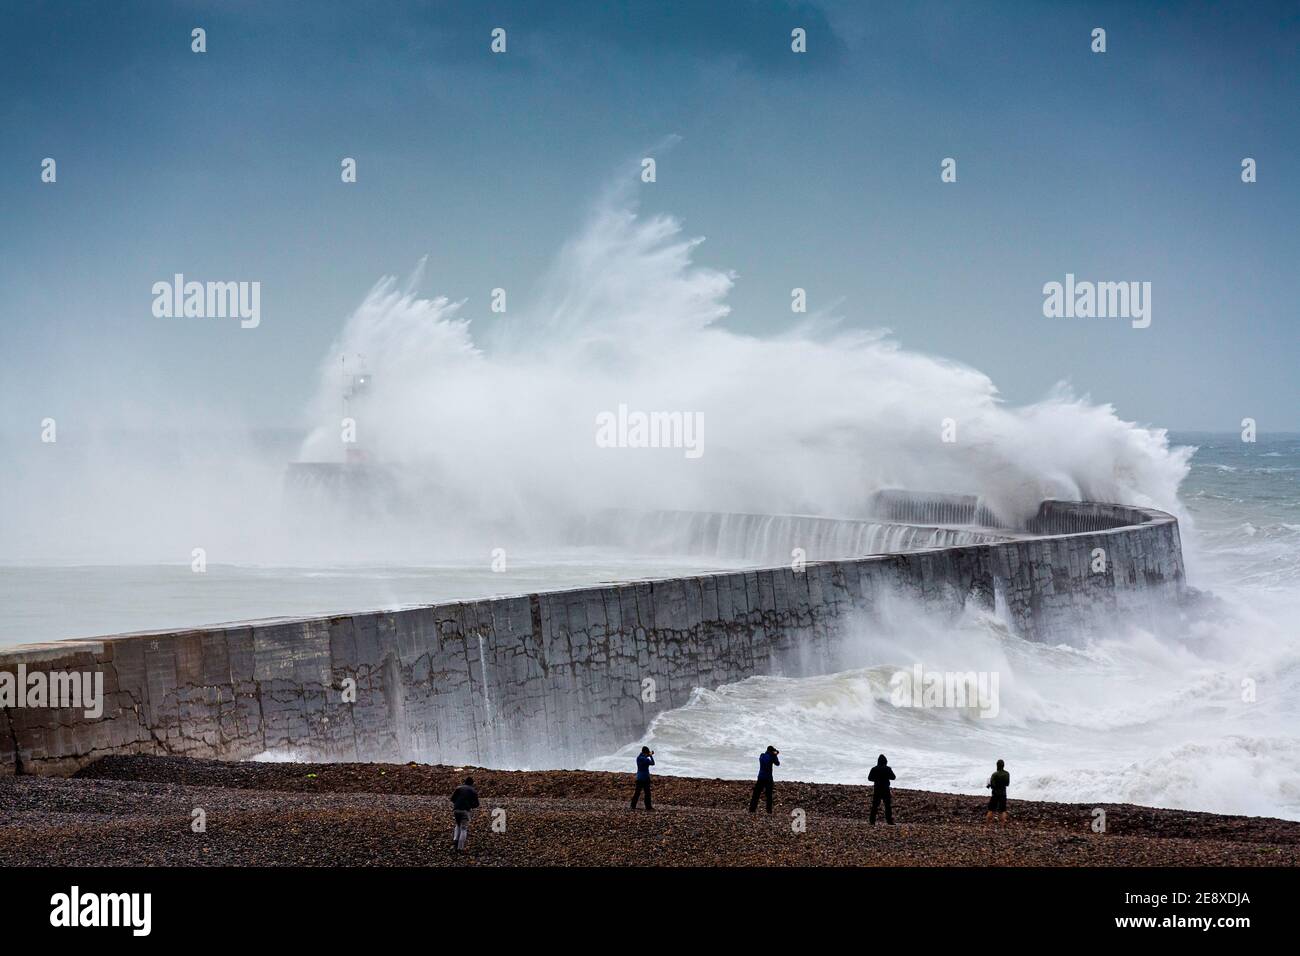 Enormous waves crash over the sea wall at Newhaven, East Sussex. Picture date Saturday 10th August, 2019. Picture by Christopher Ison. Stock Photo